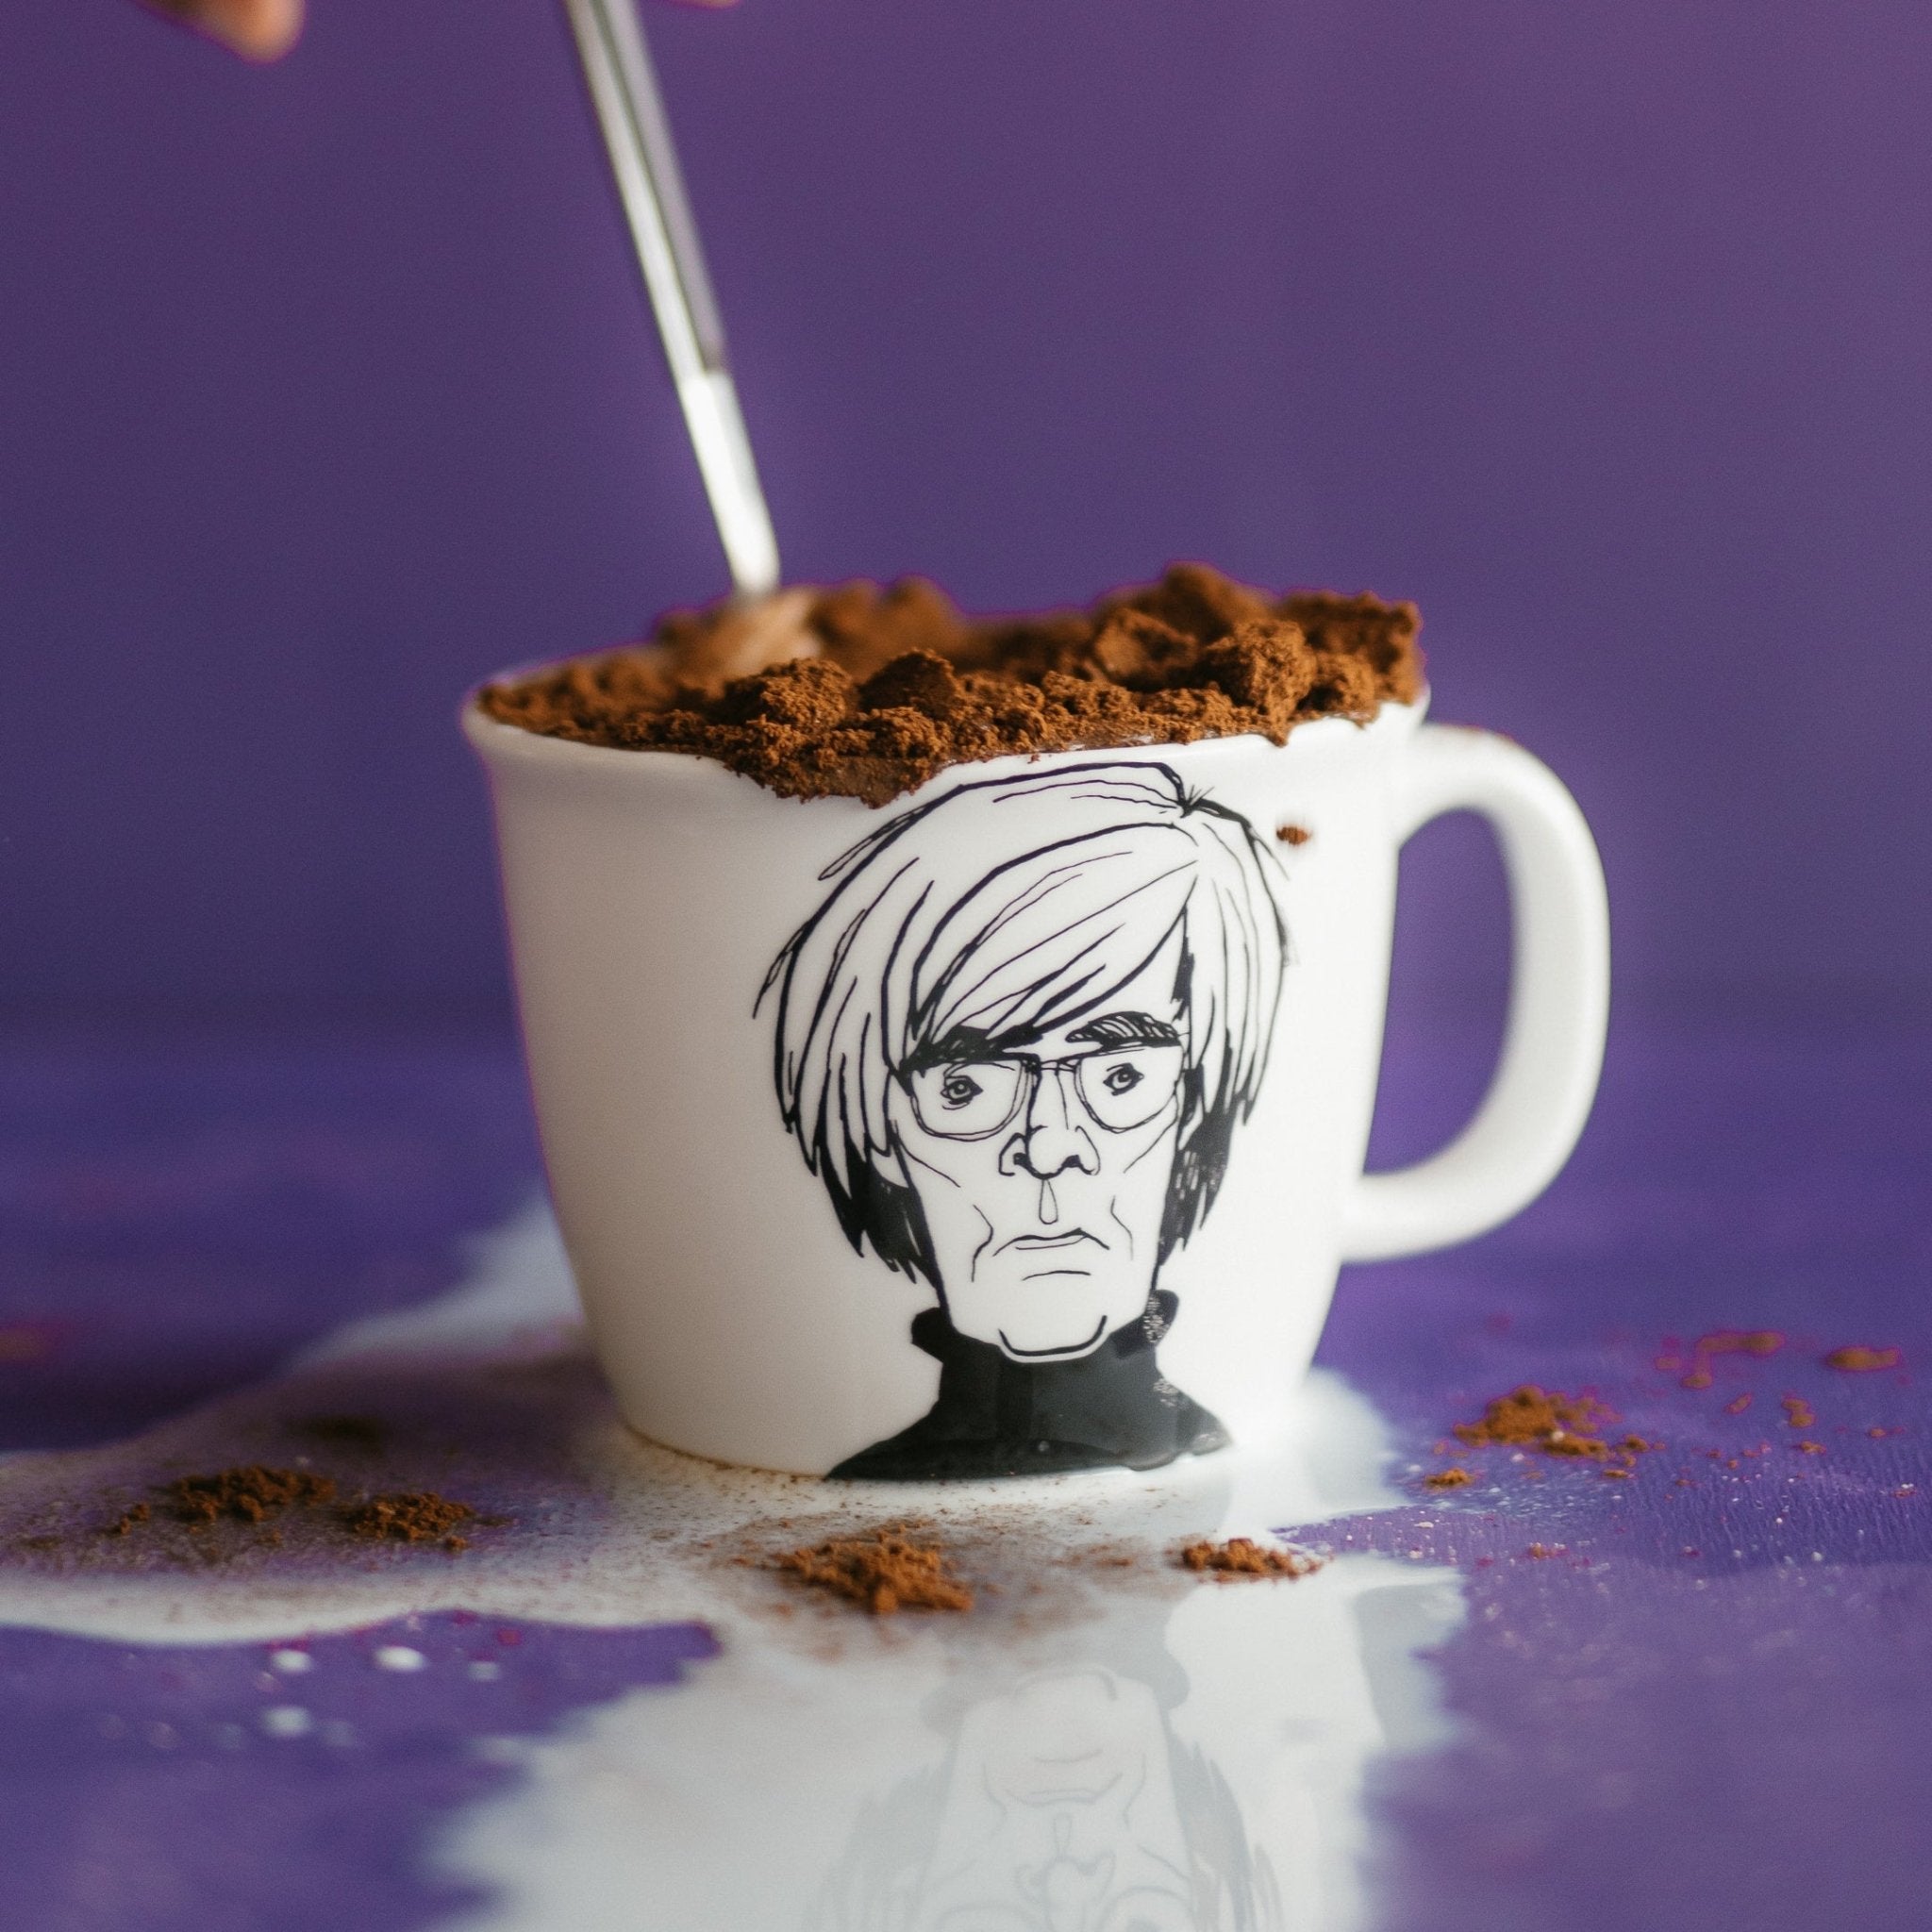 Porcelain cup inspired by Andy Warhol with coffee